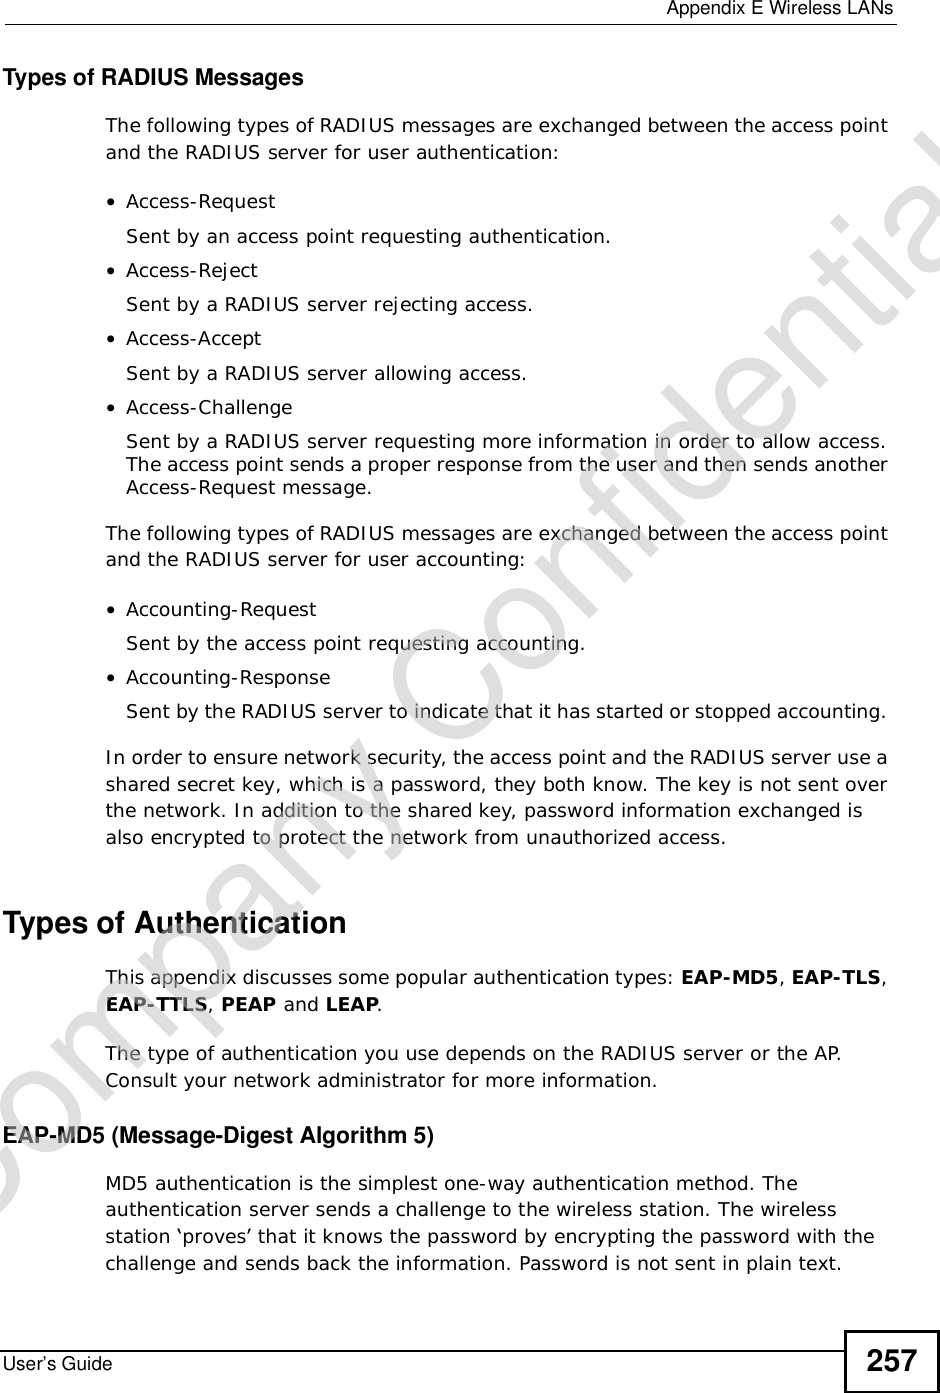  Appendix EWireless LANsUser’s Guide 257Types of RADIUS MessagesThe following types of RADIUS messages are exchanged between the access point and the RADIUS server for user authentication:•Access-RequestSent by an access point requesting authentication.•Access-RejectSent by a RADIUS server rejecting access.•Access-AcceptSent by a RADIUS server allowing access. •Access-ChallengeSent by a RADIUS server requesting more information in order to allow access. The access point sends a proper response from the user and then sends another Access-Request message. The following types of RADIUS messages are exchanged between the access point and the RADIUS server for user accounting:•Accounting-RequestSent by the access point requesting accounting.•Accounting-ResponseSent by the RADIUS server to indicate that it has started or stopped accounting. In order to ensure network security, the access point and the RADIUS server use a shared secret key, which is a password, they both know. The key is not sent over the network. In addition to the shared key, password information exchanged is also encrypted to protect the network from unauthorized access. Types of Authentication This appendix discusses some popular authentication types: EAP-MD5,EAP-TLS,EAP-TTLS,PEAP and LEAP.The type of authentication you use depends on the RADIUS server or the AP. Consult your network administrator for more information.EAP-MD5 (Message-Digest Algorithm 5)MD5 authentication is the simplest one-way authentication method. The authentication server sends a challenge to the wireless station. The wireless station ‘proves’ that it knows the password by encrypting the password with the challenge and sends back the information. Password is not sent in plain text. Company Confidential